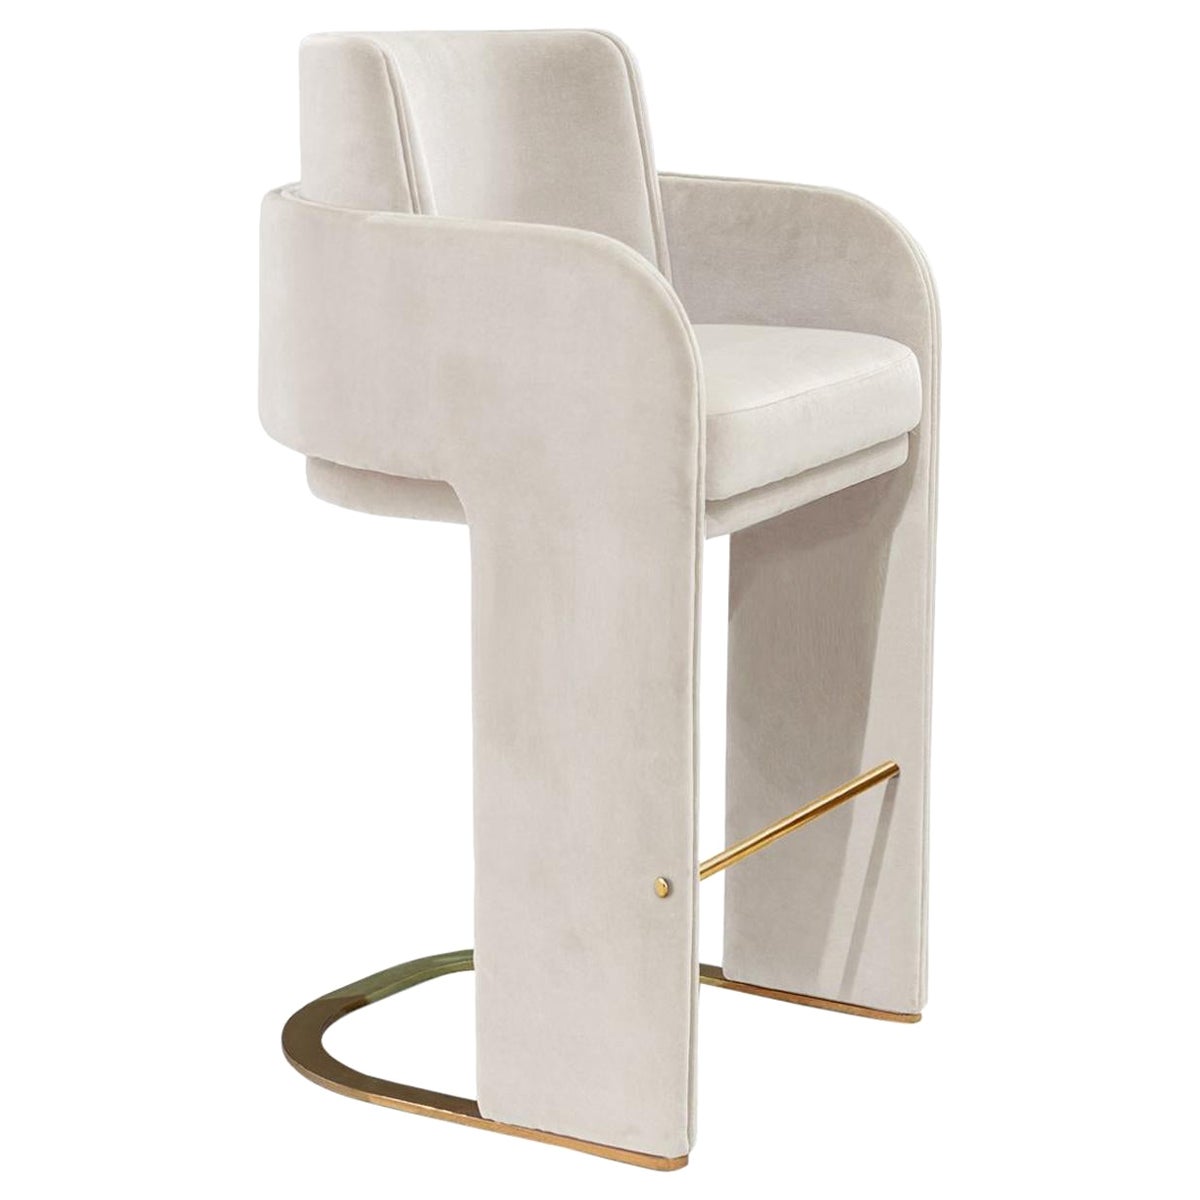 Odisseia Bar Chair by Dooq For Sale